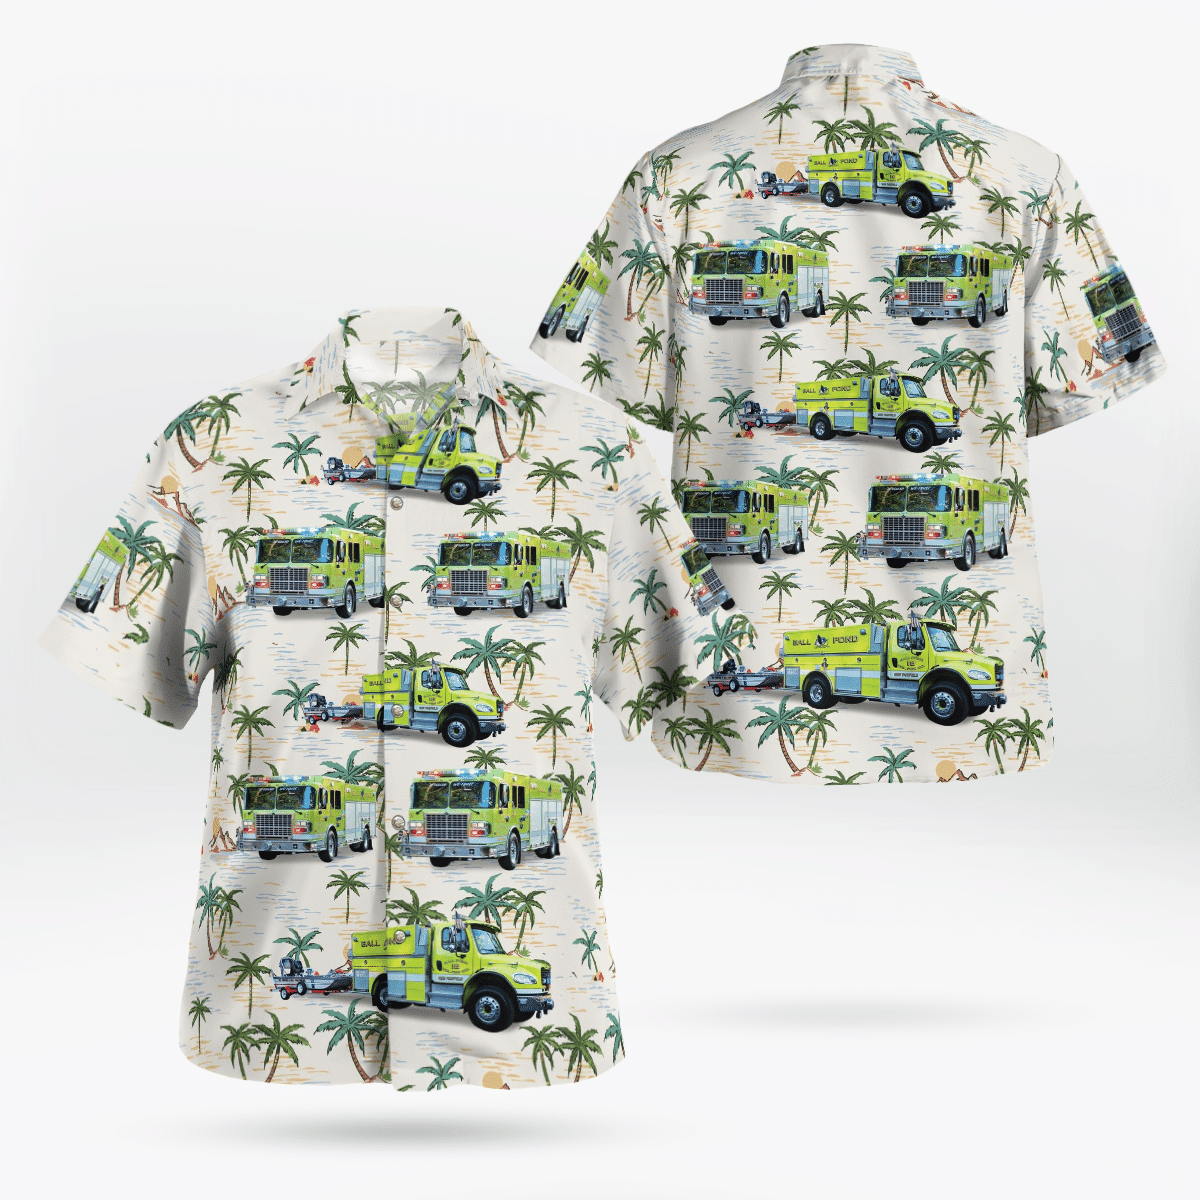 Shop now to find the perfect Hawaii Shirt for your hobby 142